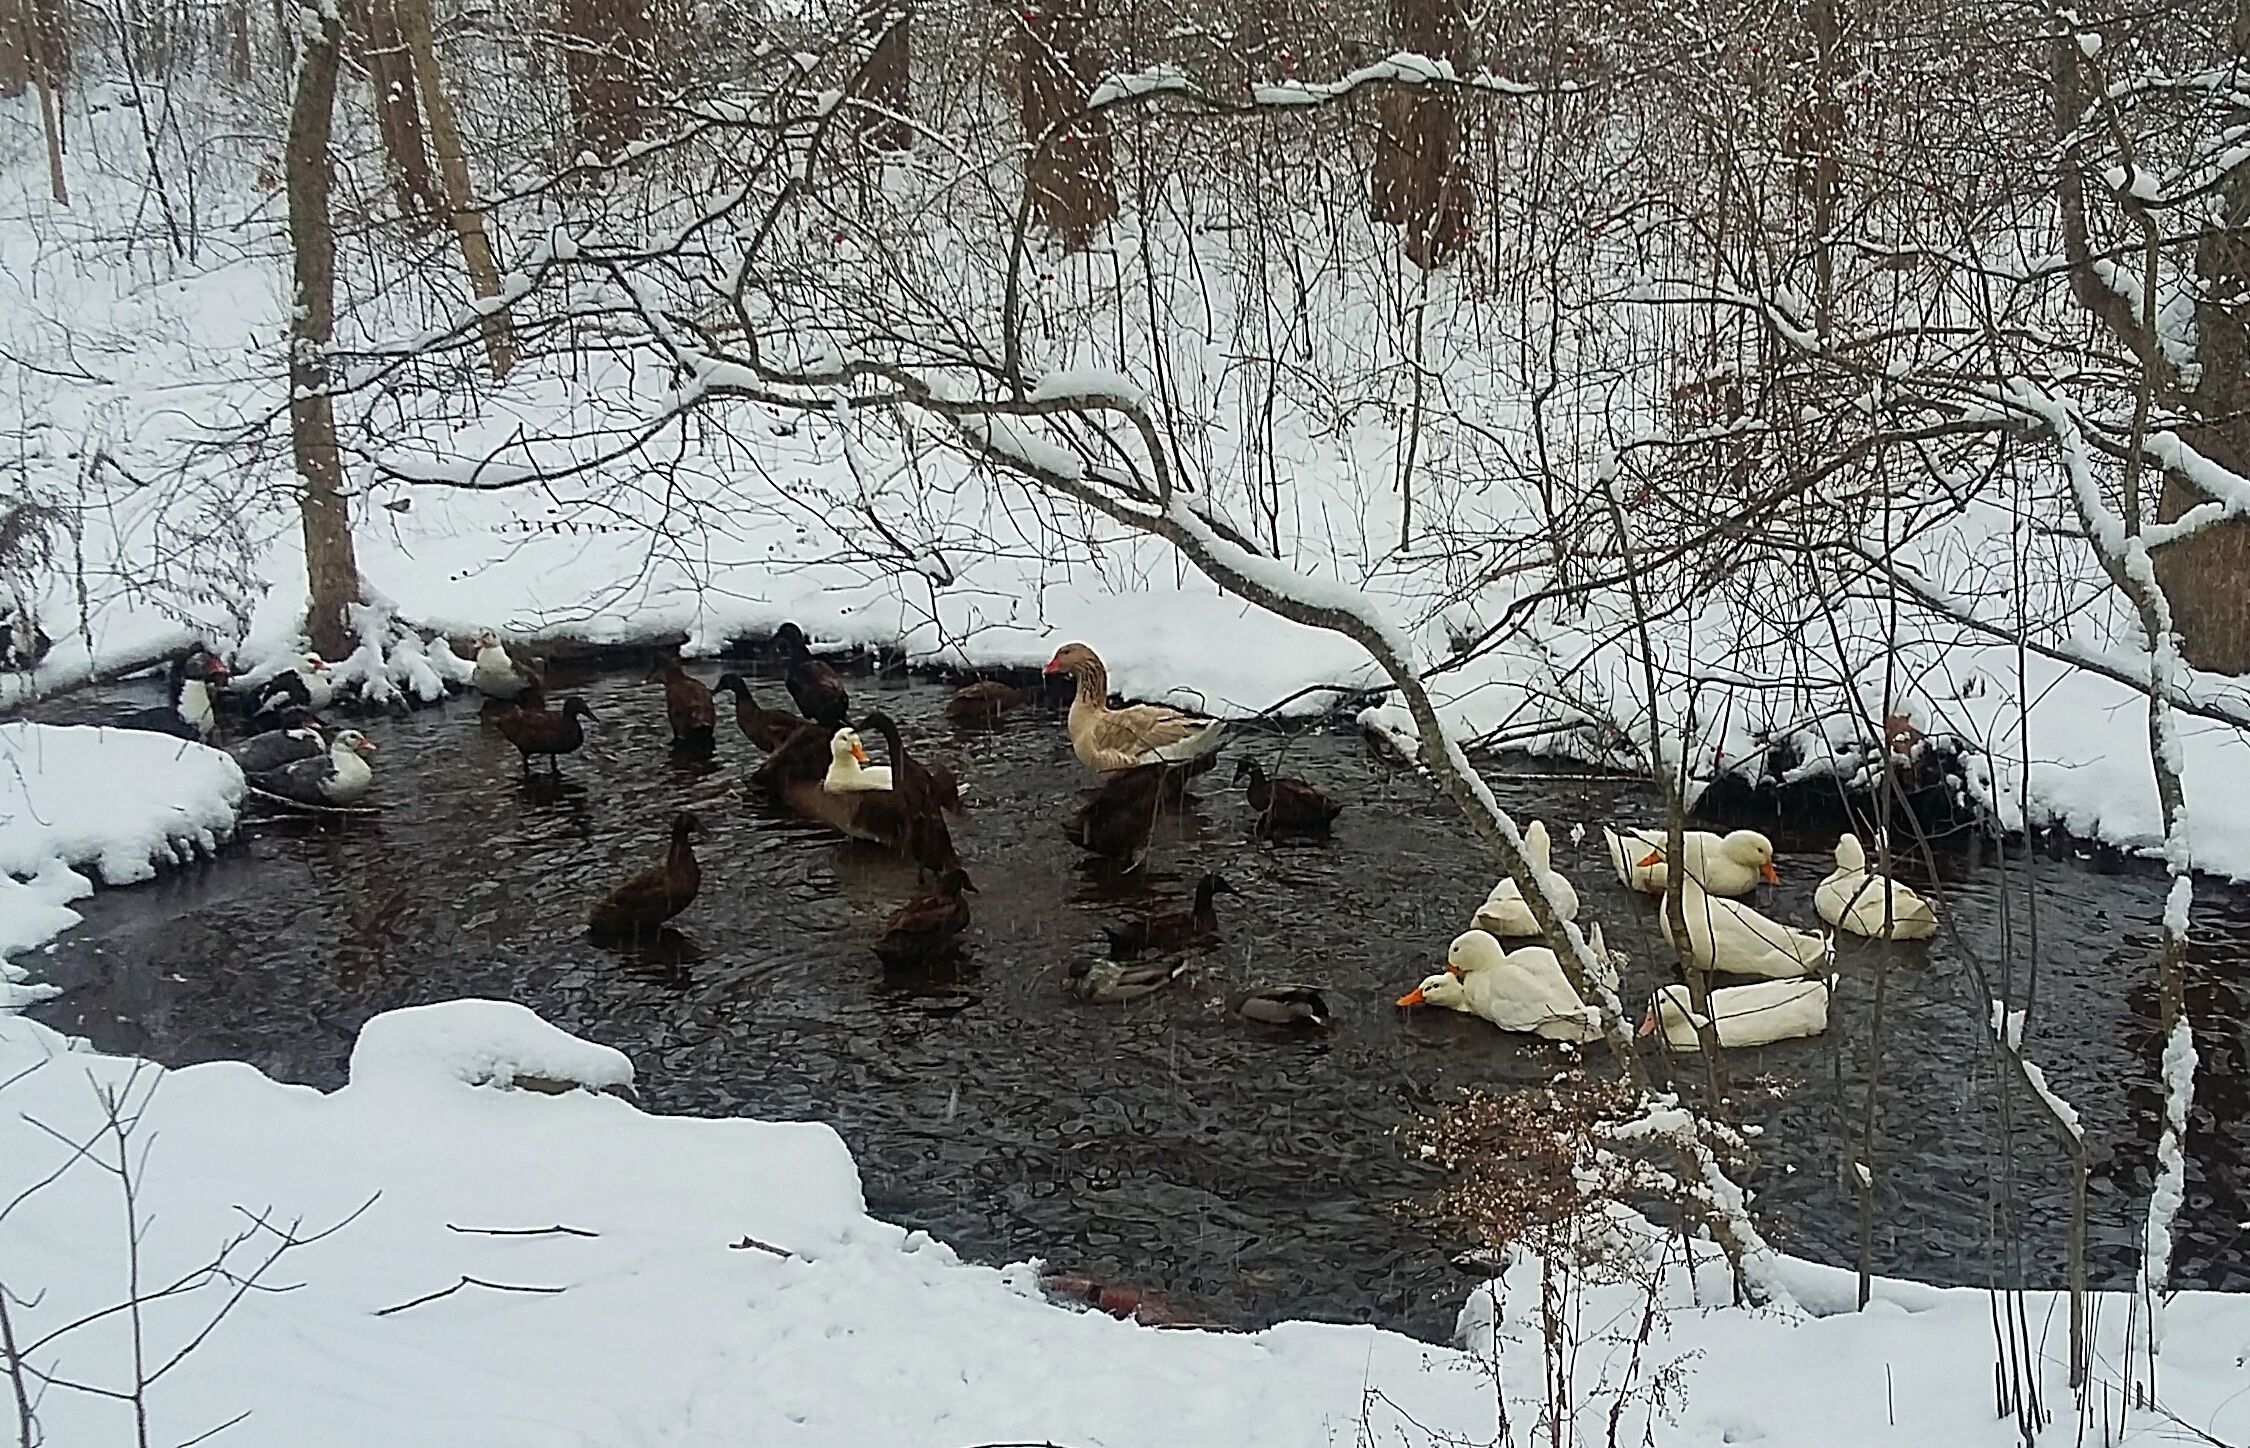 Ducks in the pond after a snow